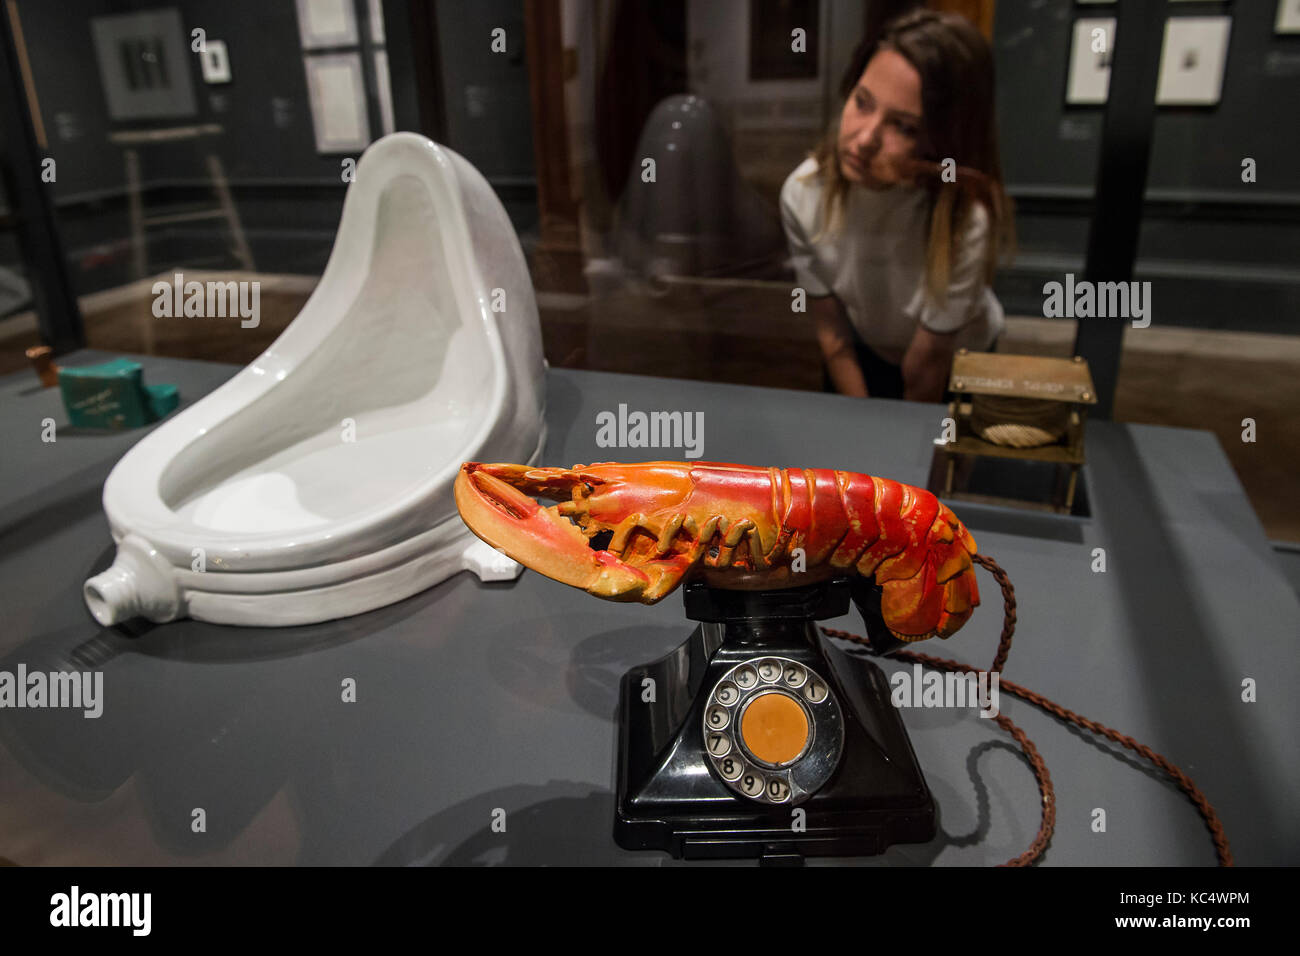 London, UK. 03rd Oct, 2017. Marcel Duchamp’s Fountain, 1917/1964 and Salvador Dalí’s Lobster Telephone, 1938 - Dalí/Duchamp at the Royal Academy of Arts. It is the first exhibition to present the art of these famous artists in dialogue. Marcel Duchamp (1887–1968) and Salvador Dalí (1904–1989) are usually seen as opposites in almost every respect, yet they shared attitudes to art and life that are manifested in their respective oeuvres on many levels. Dalí / Duchamp runs at the Royal Academy of Arts from 7 October 2017 – 3 January 2018. Credit: Guy Bell/Alamy Live News Stock Photo